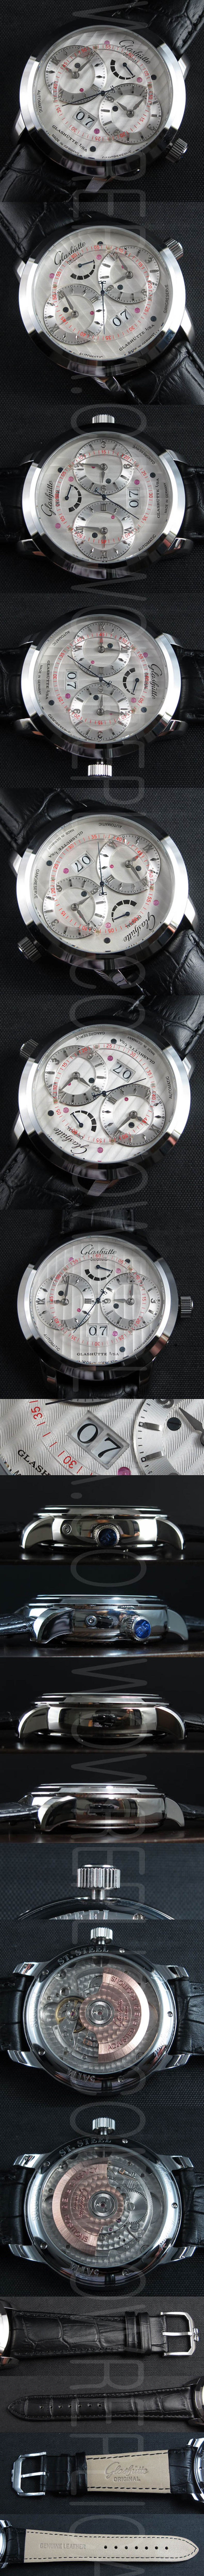 Replica Glashutte Dual Time Power-Reserve Watches